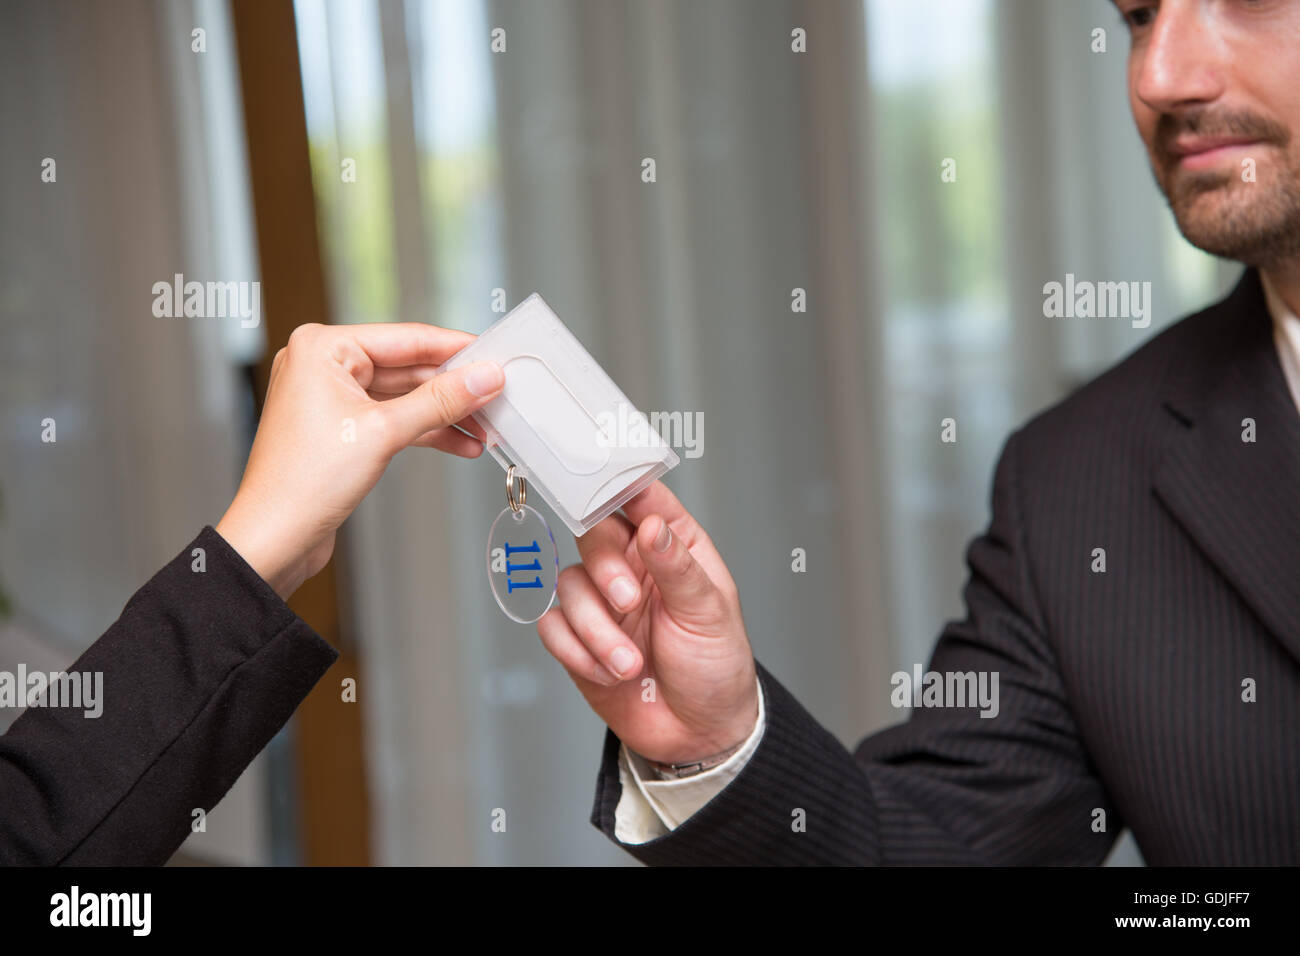 Hotel reception key check-in close up Stock Photo